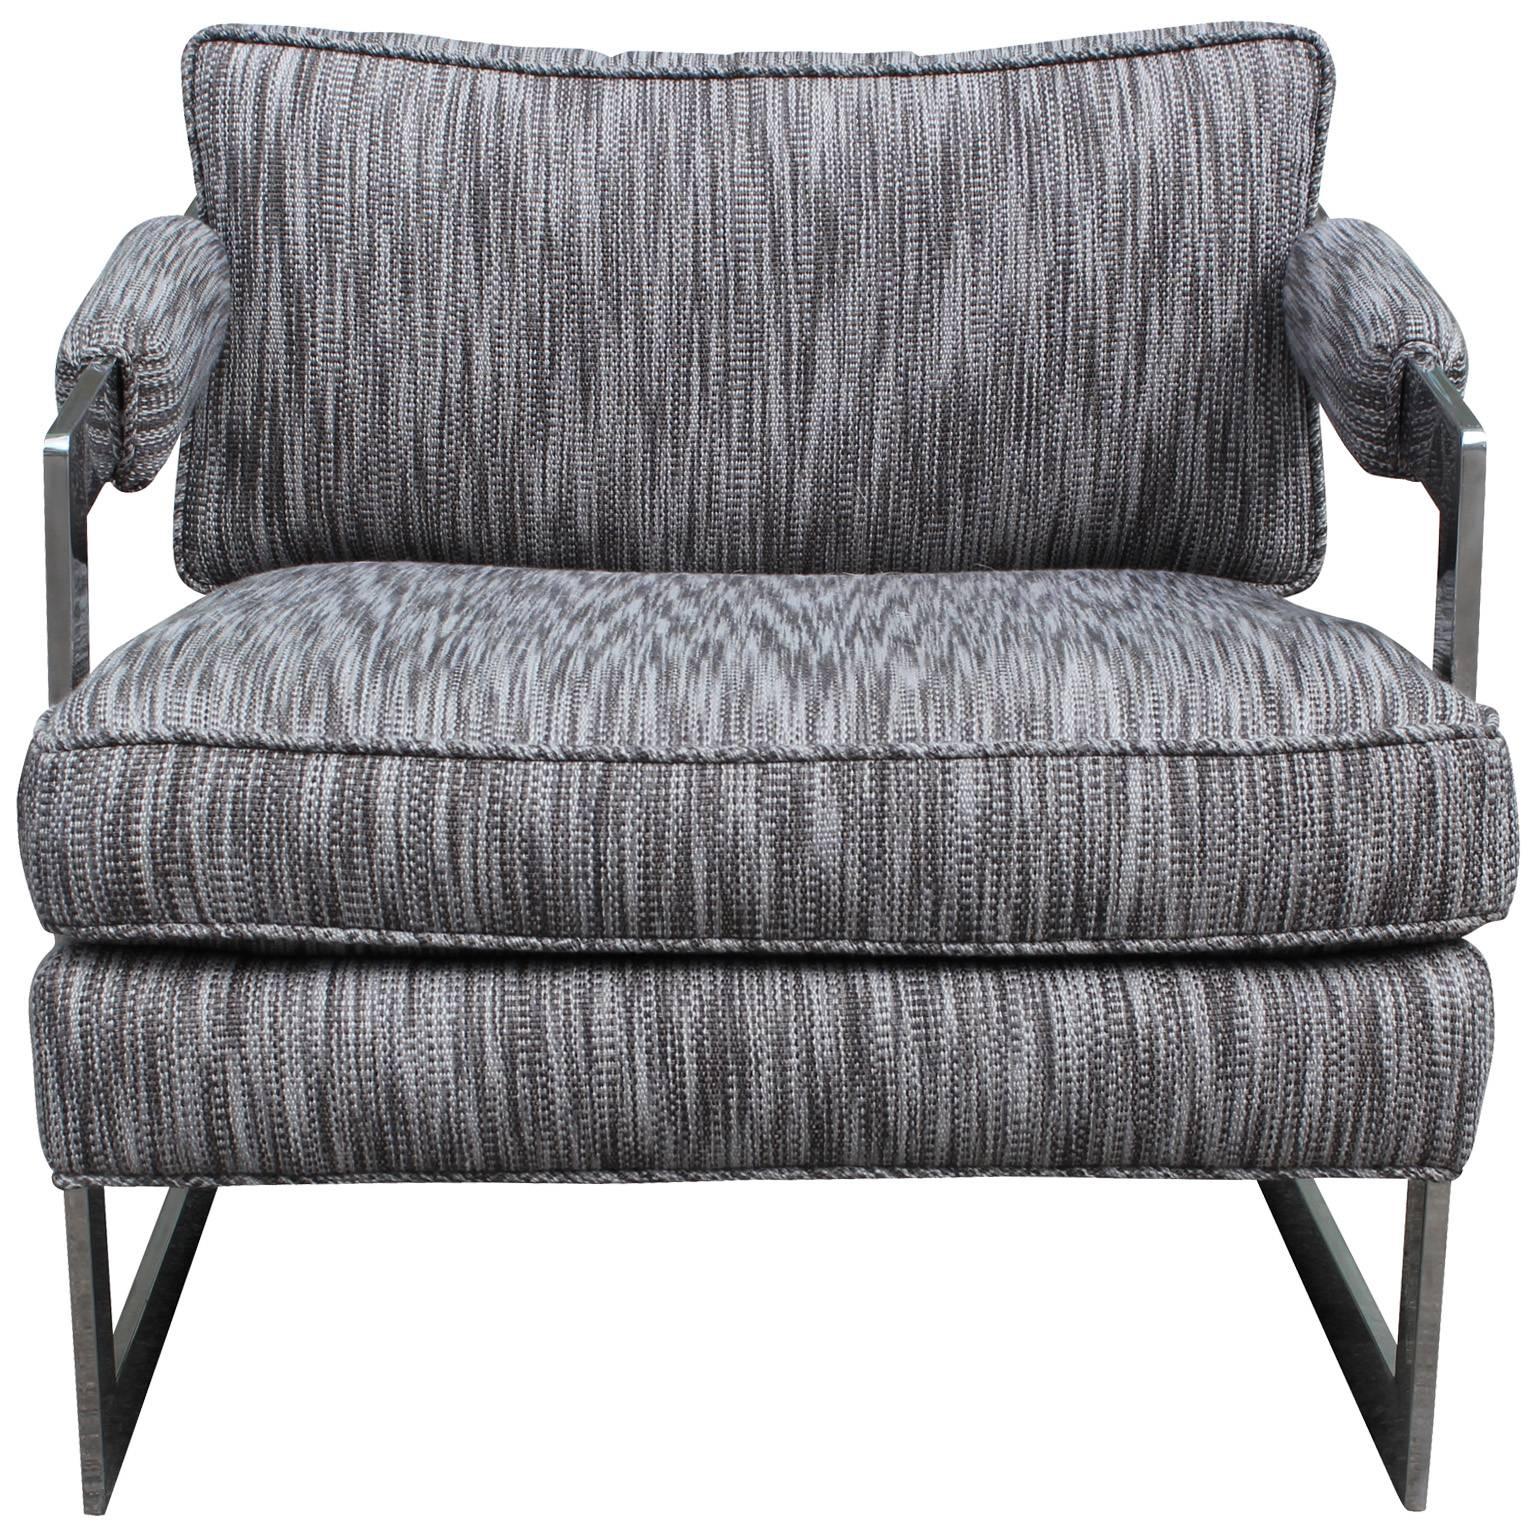 Wonderful lounge chair in the style of Milo Baughman. Heavy chrome flat bar cantilevered frame is in great shape. Chair is freshly upholstered in a grey woven ikat. Beautifully constructed and very comfortable.